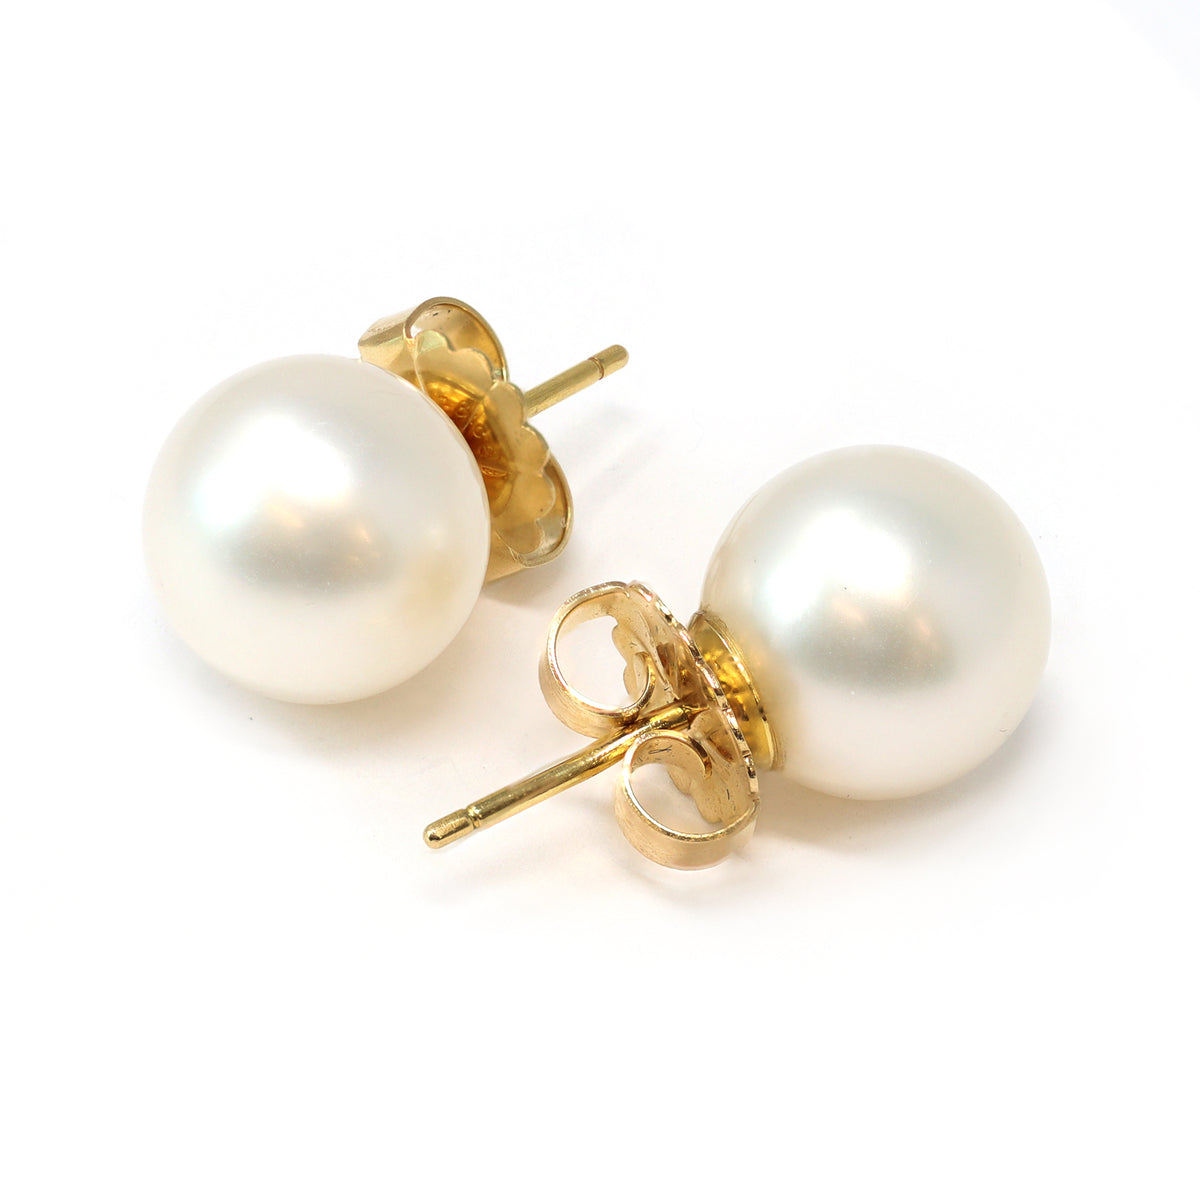 White South Sea Pearl Stud Earrings in 18 Karat Yellow Gold front and back view